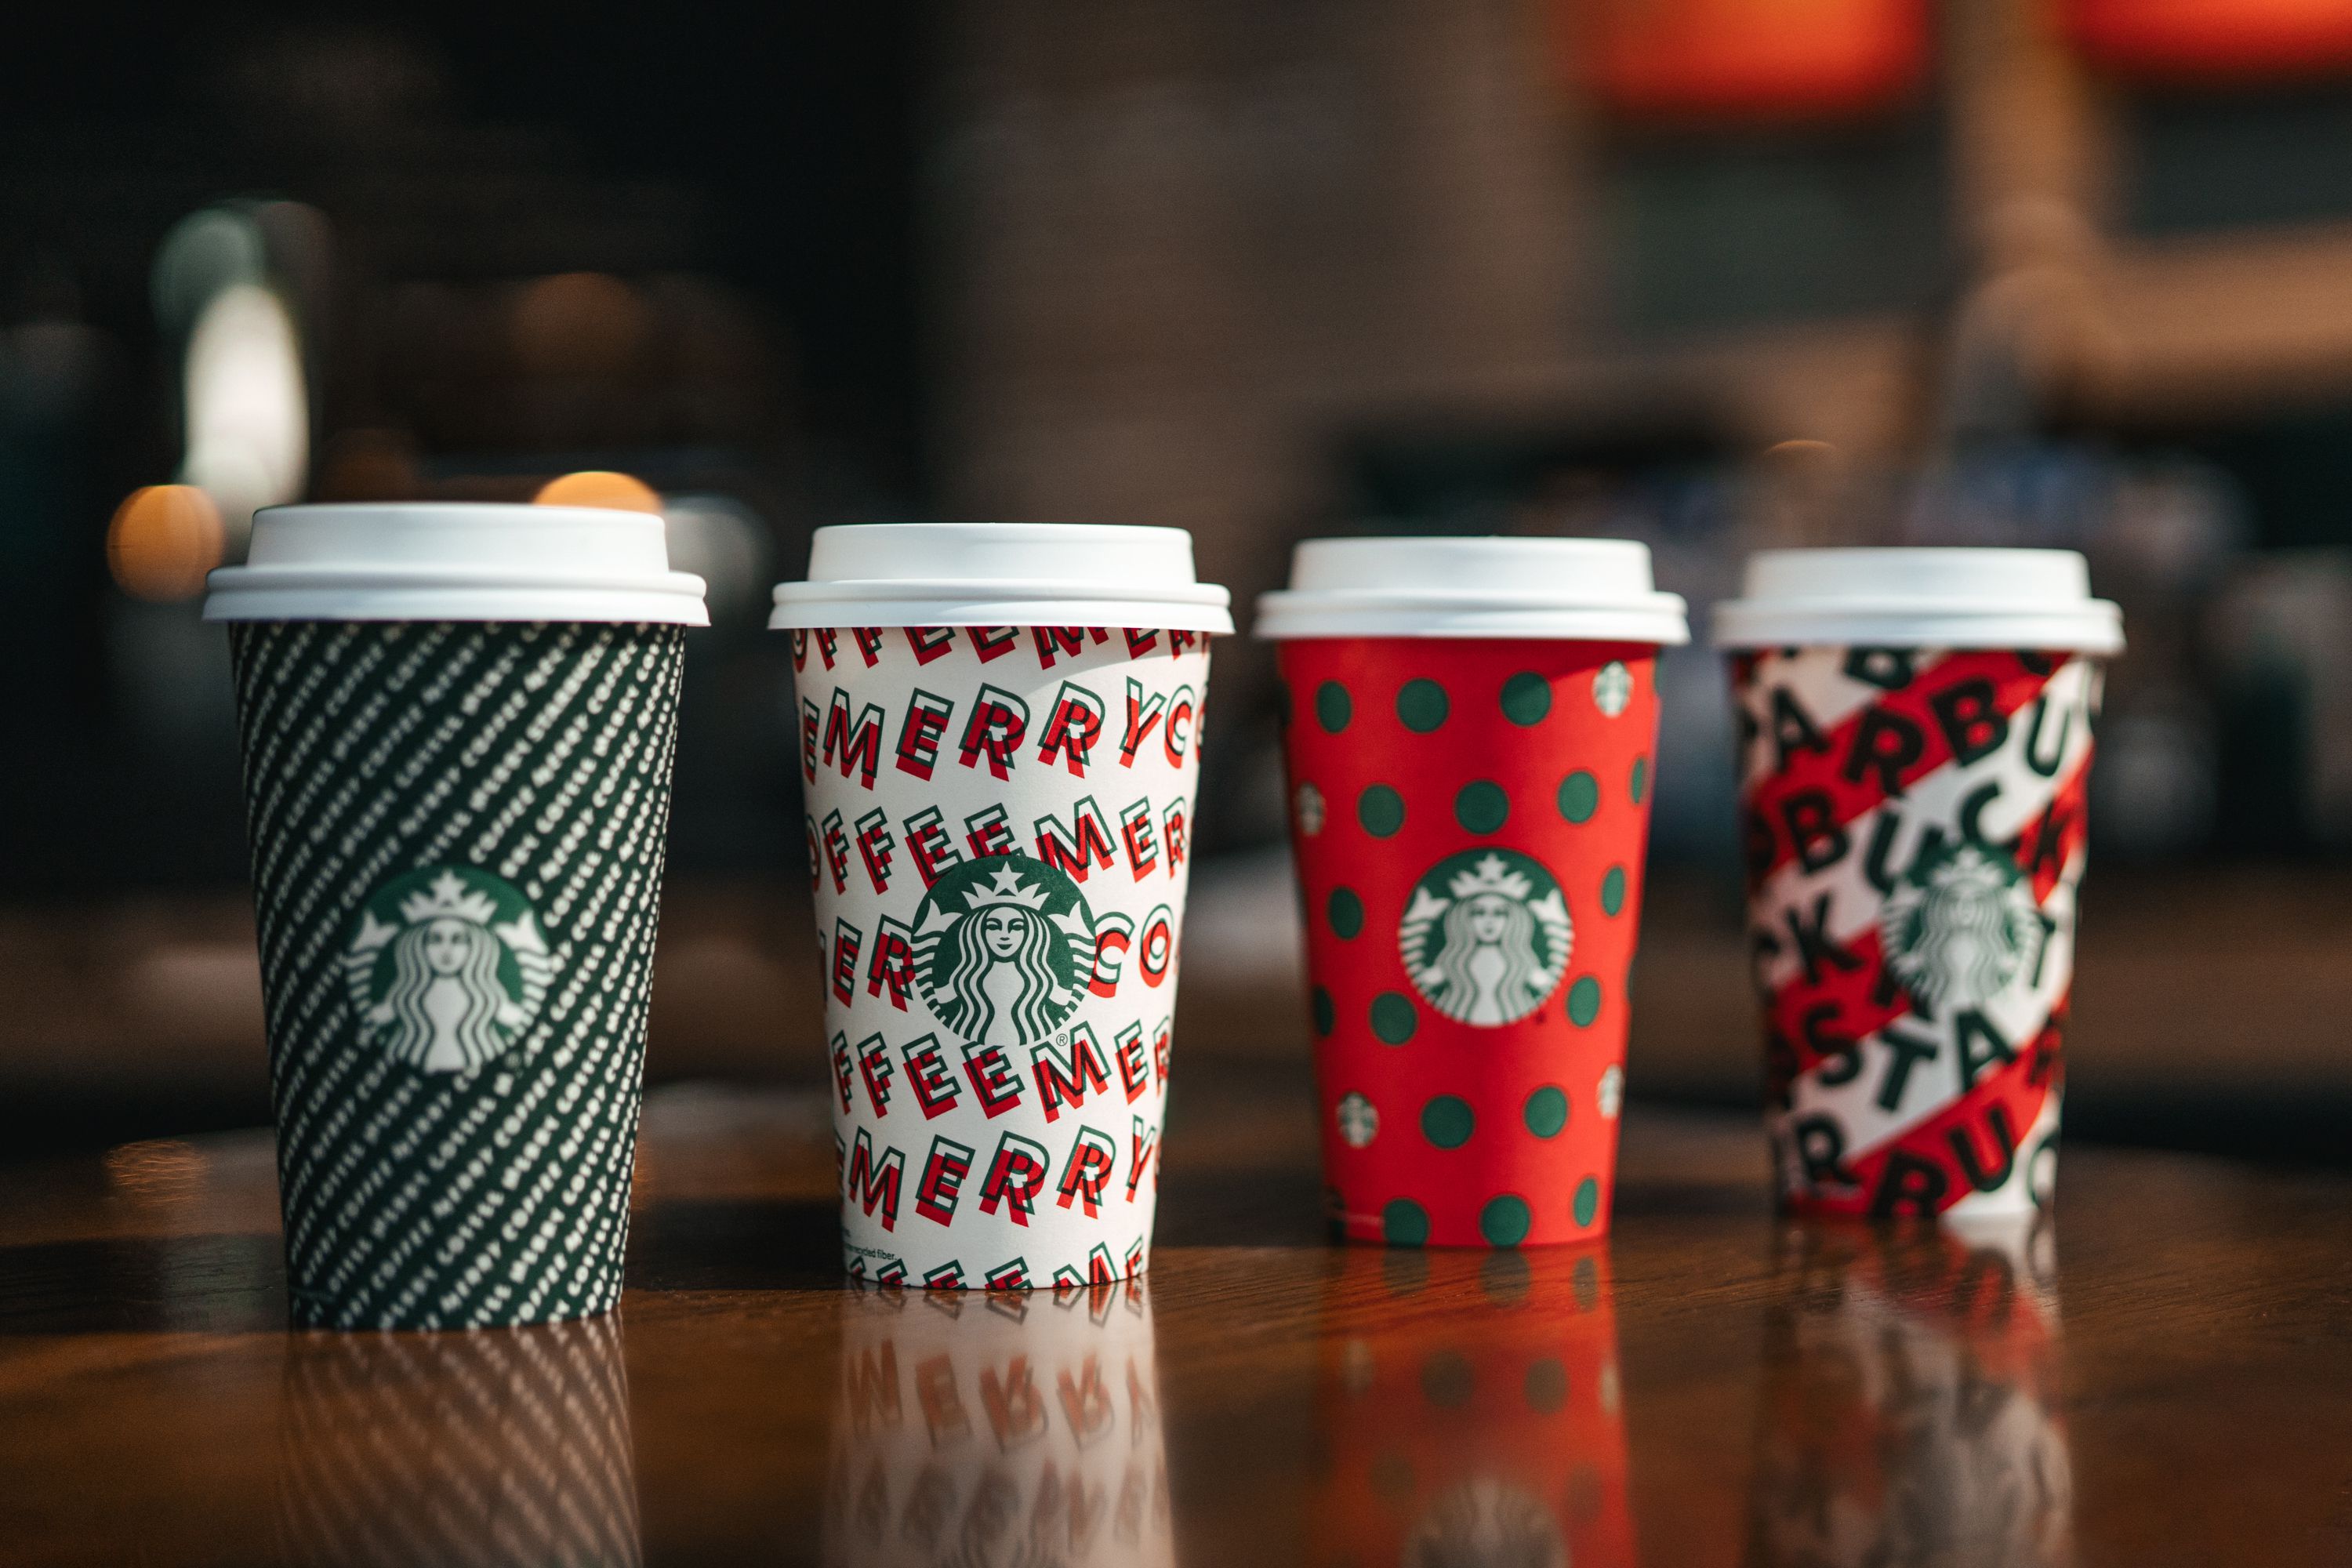 The Starbucks holiday cups drop tomorrow. Let the 'Merry Coffee' backlash  begin. 